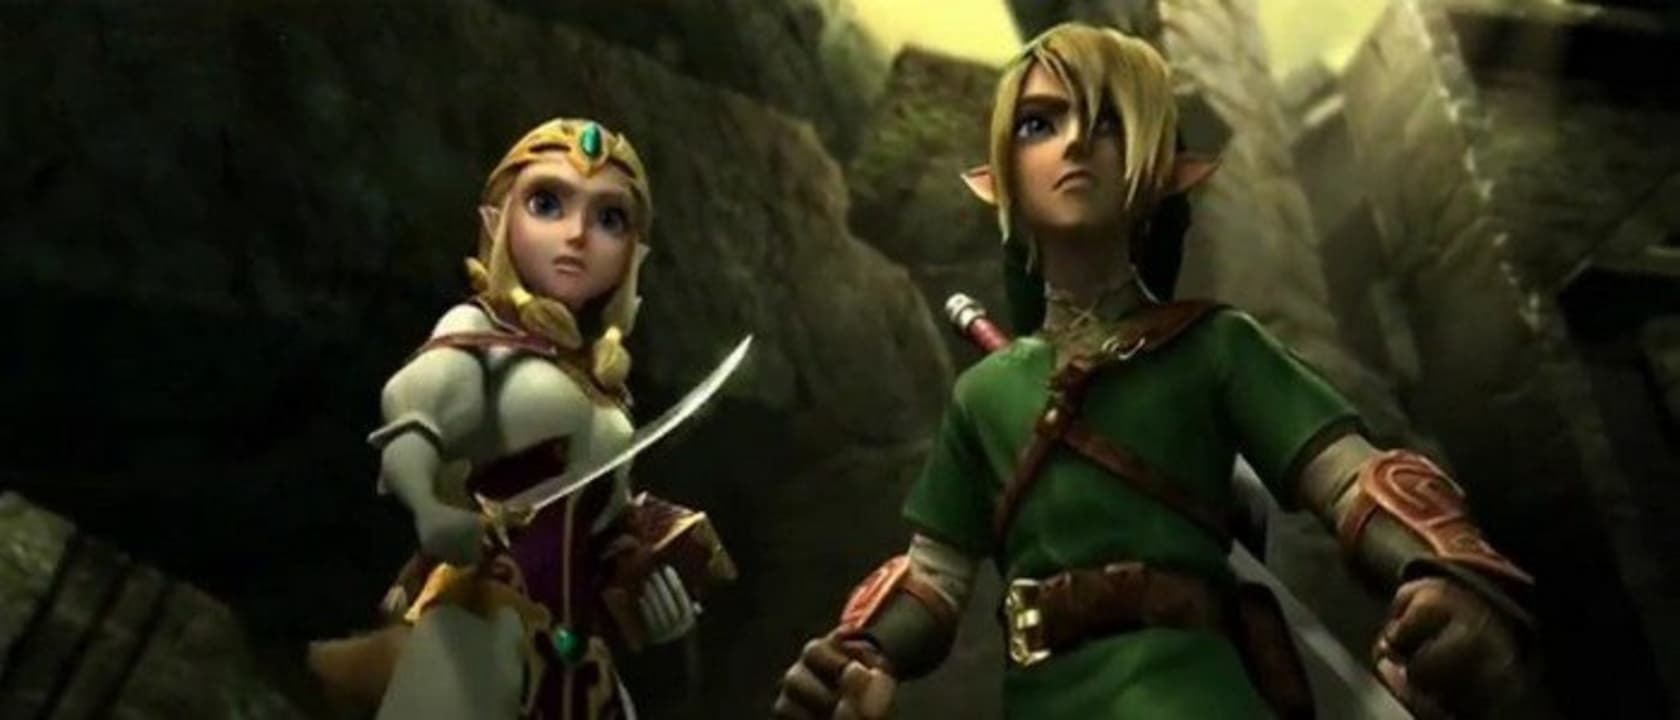 This 'The Legend of Zelda' Videogame Should be Adapted On-Screen